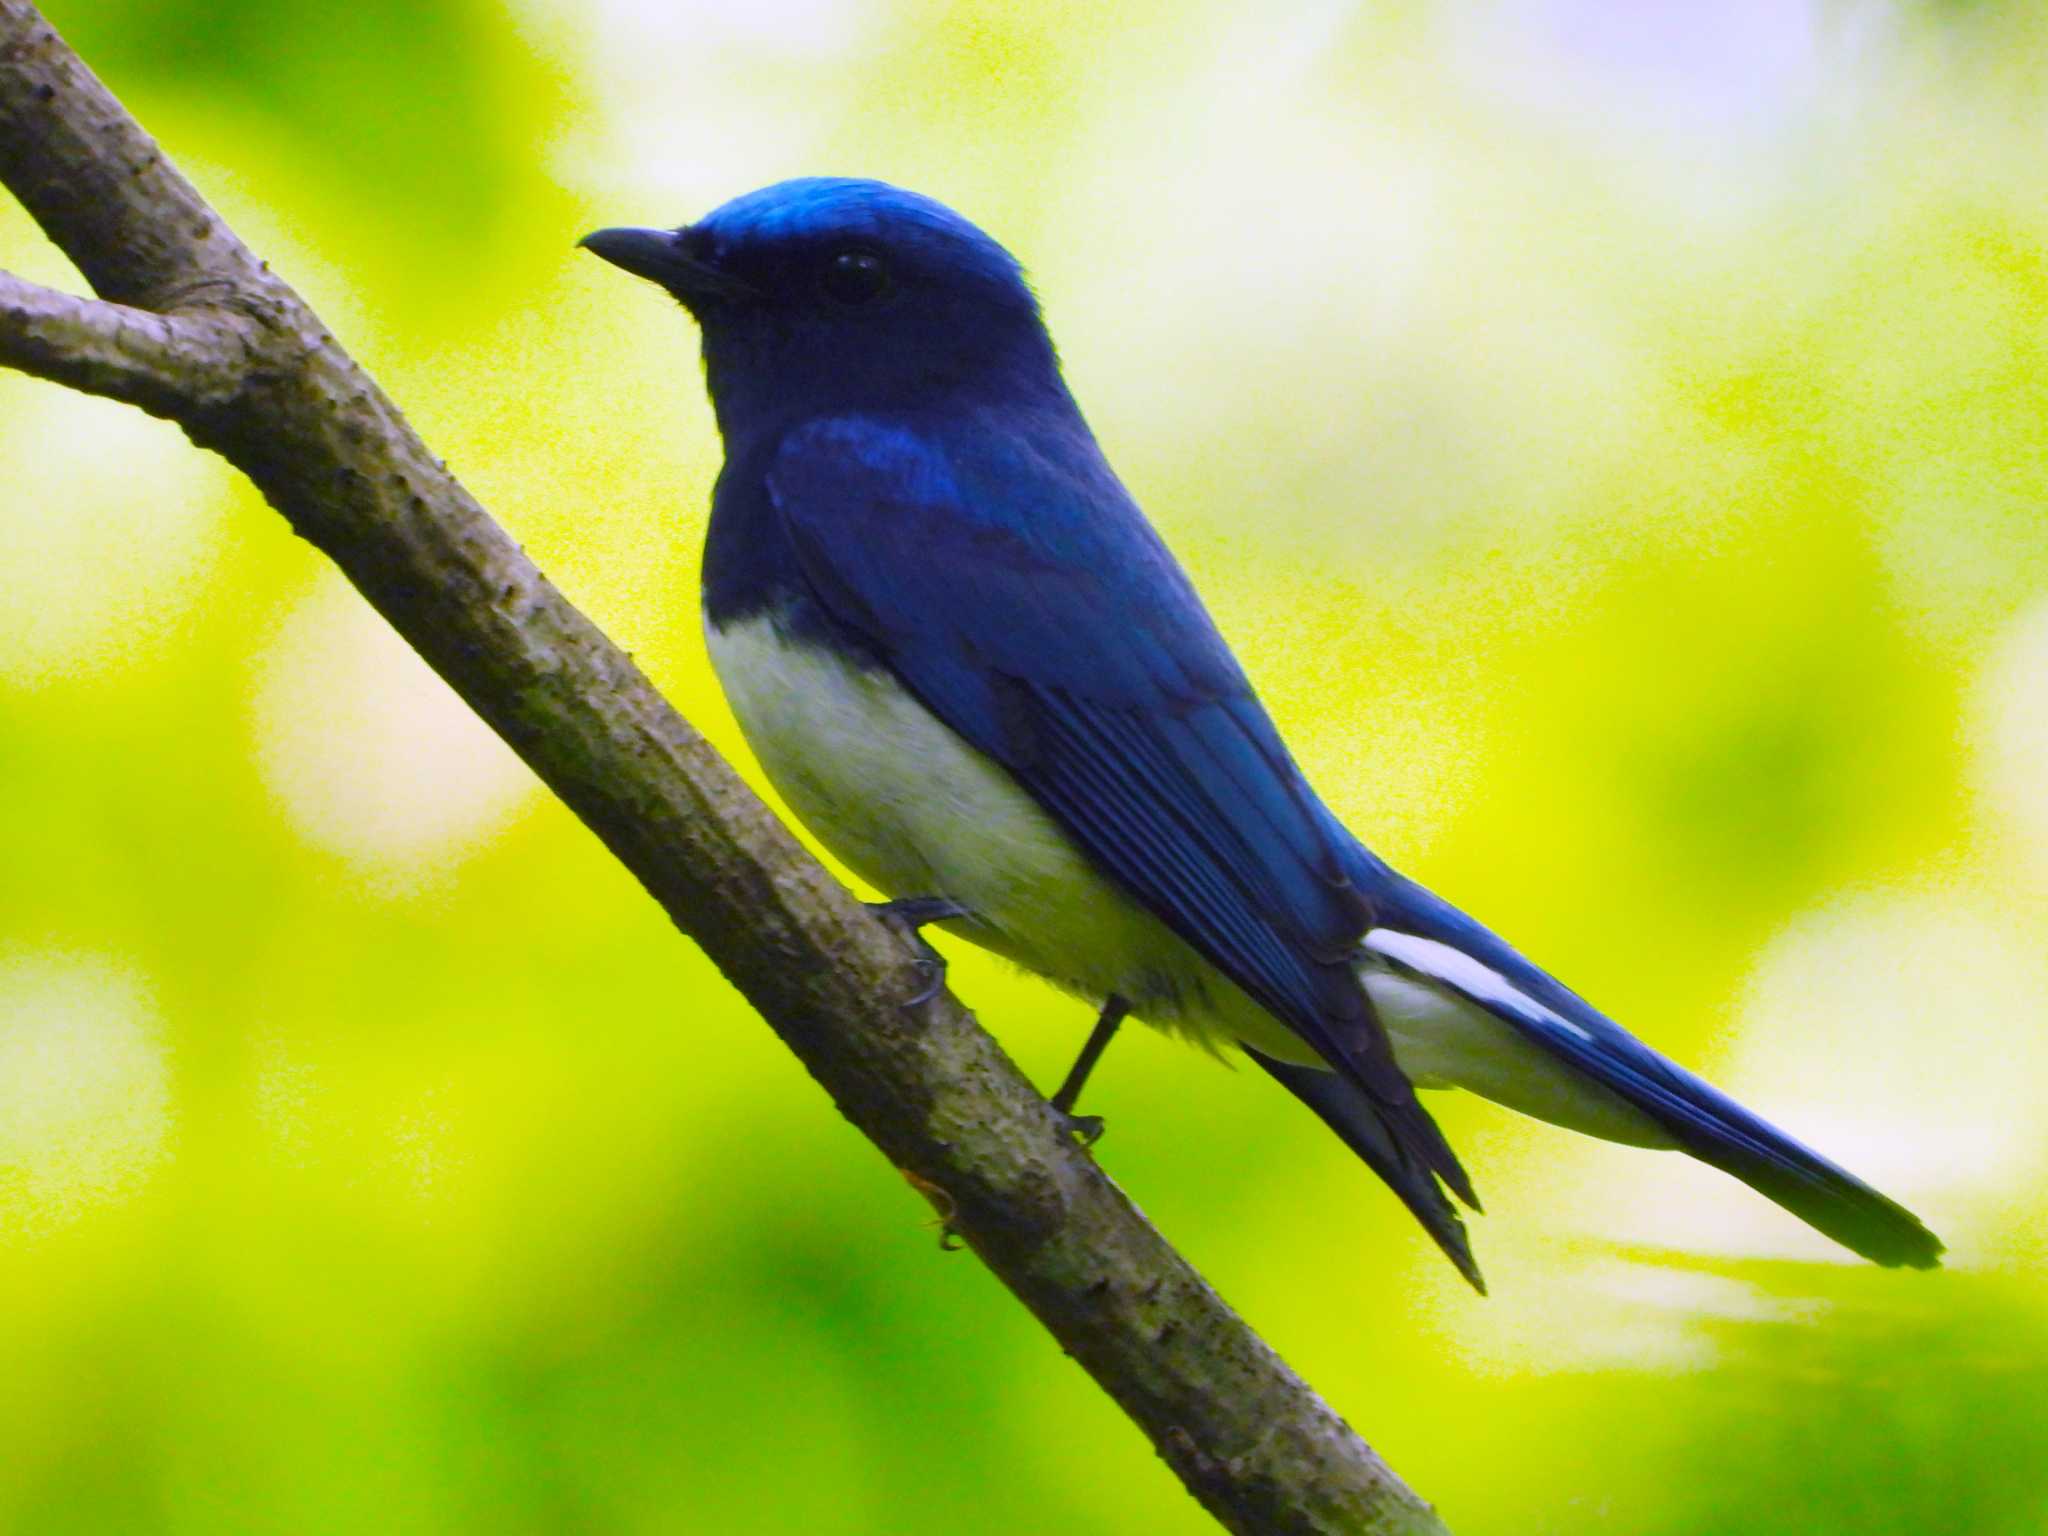 Photo of Blue-and-white Flycatcher at 太白山自然観察の森 by ぴーさん